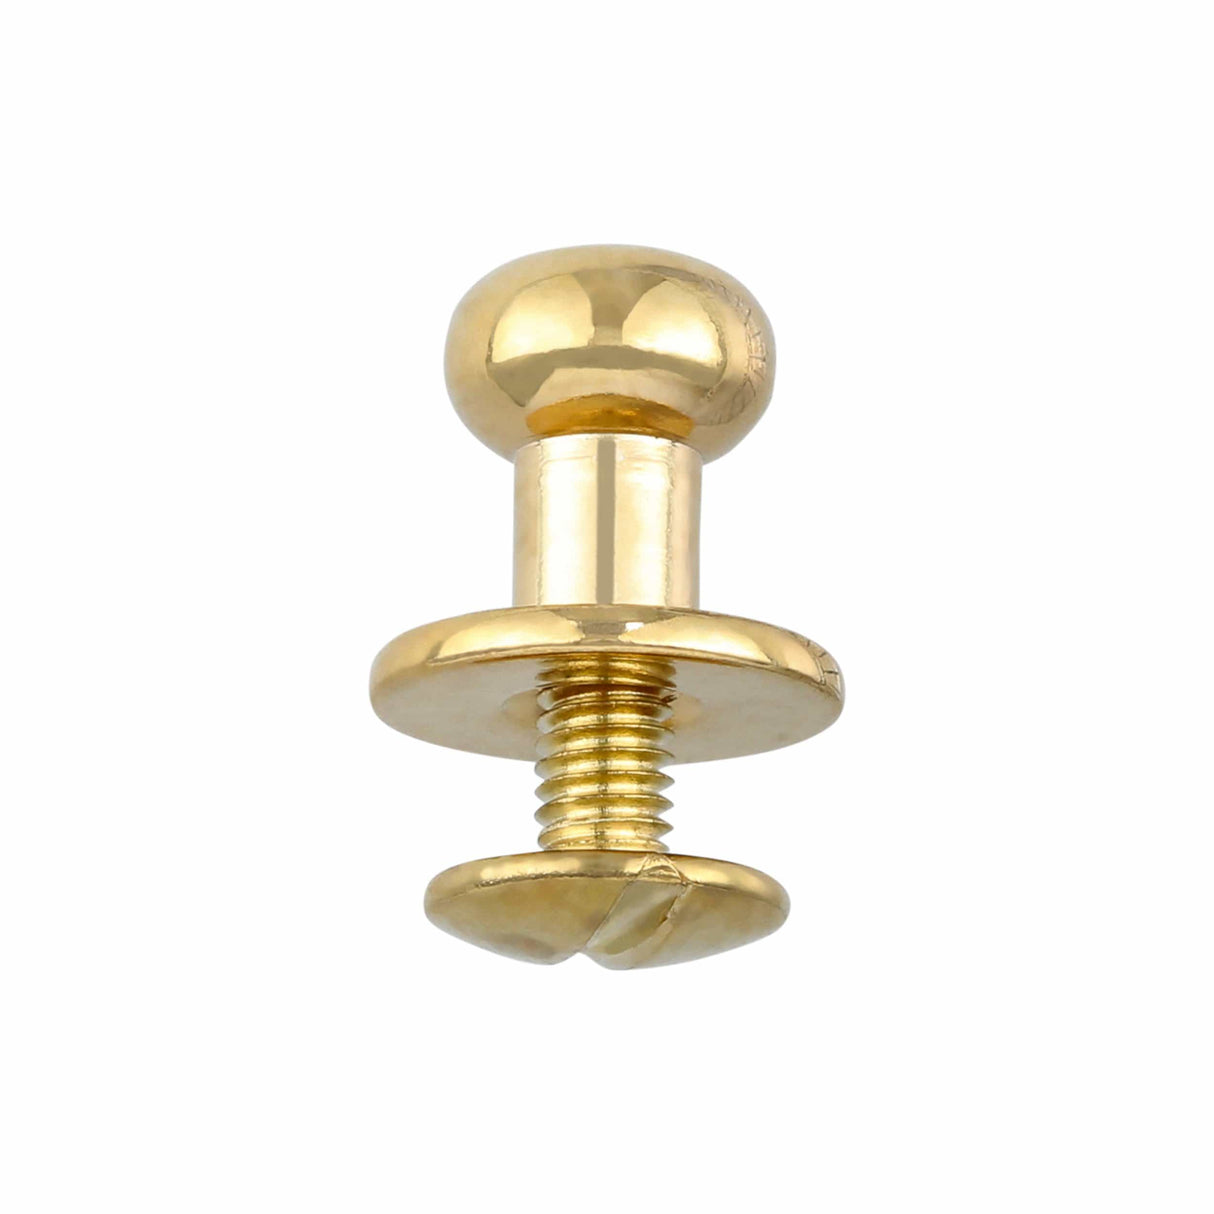 10mm, Shiny Gold, Flat Top Collar Button Stud with Screw, Solid Brass –  Weaver Leather Supply